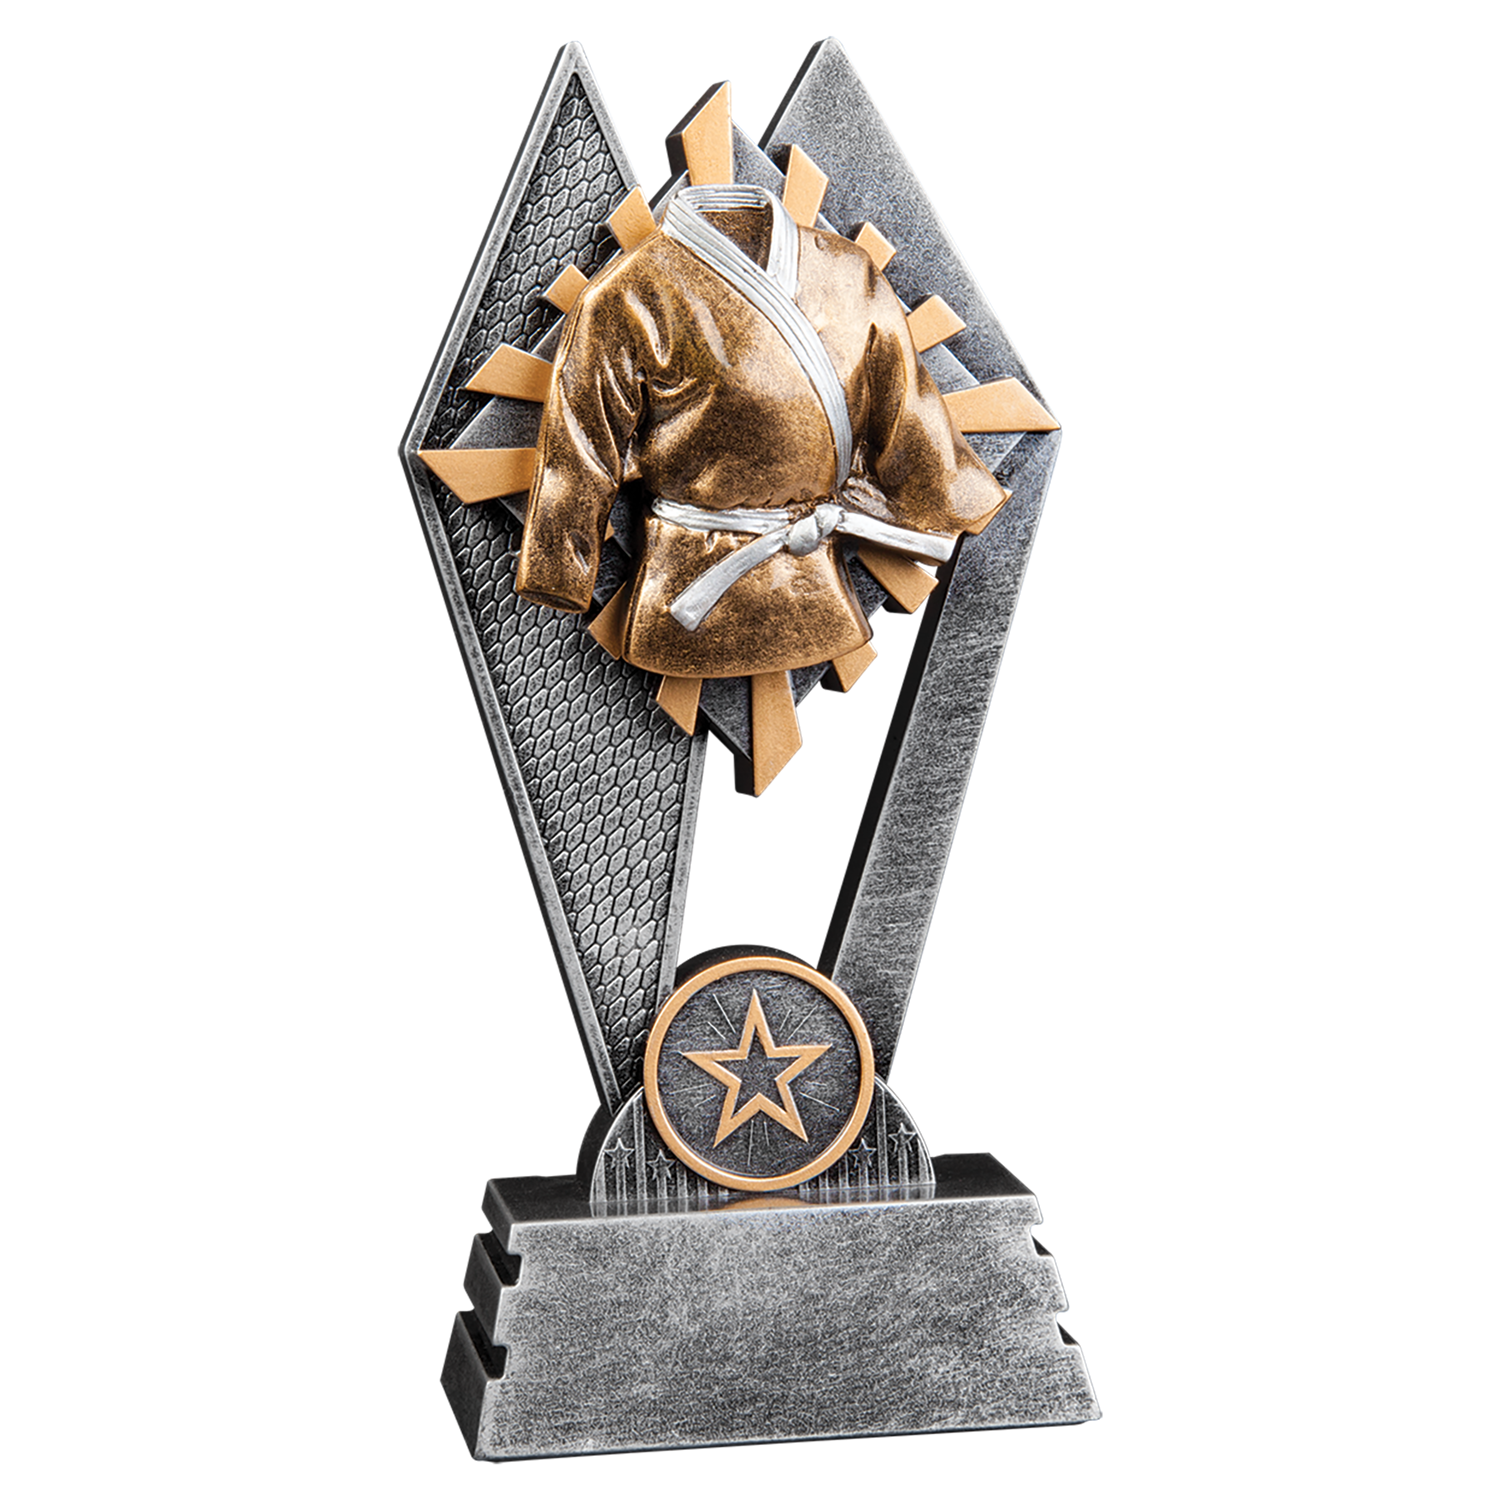 Sun Ray Martial Arts Trophy (2 sizes available)